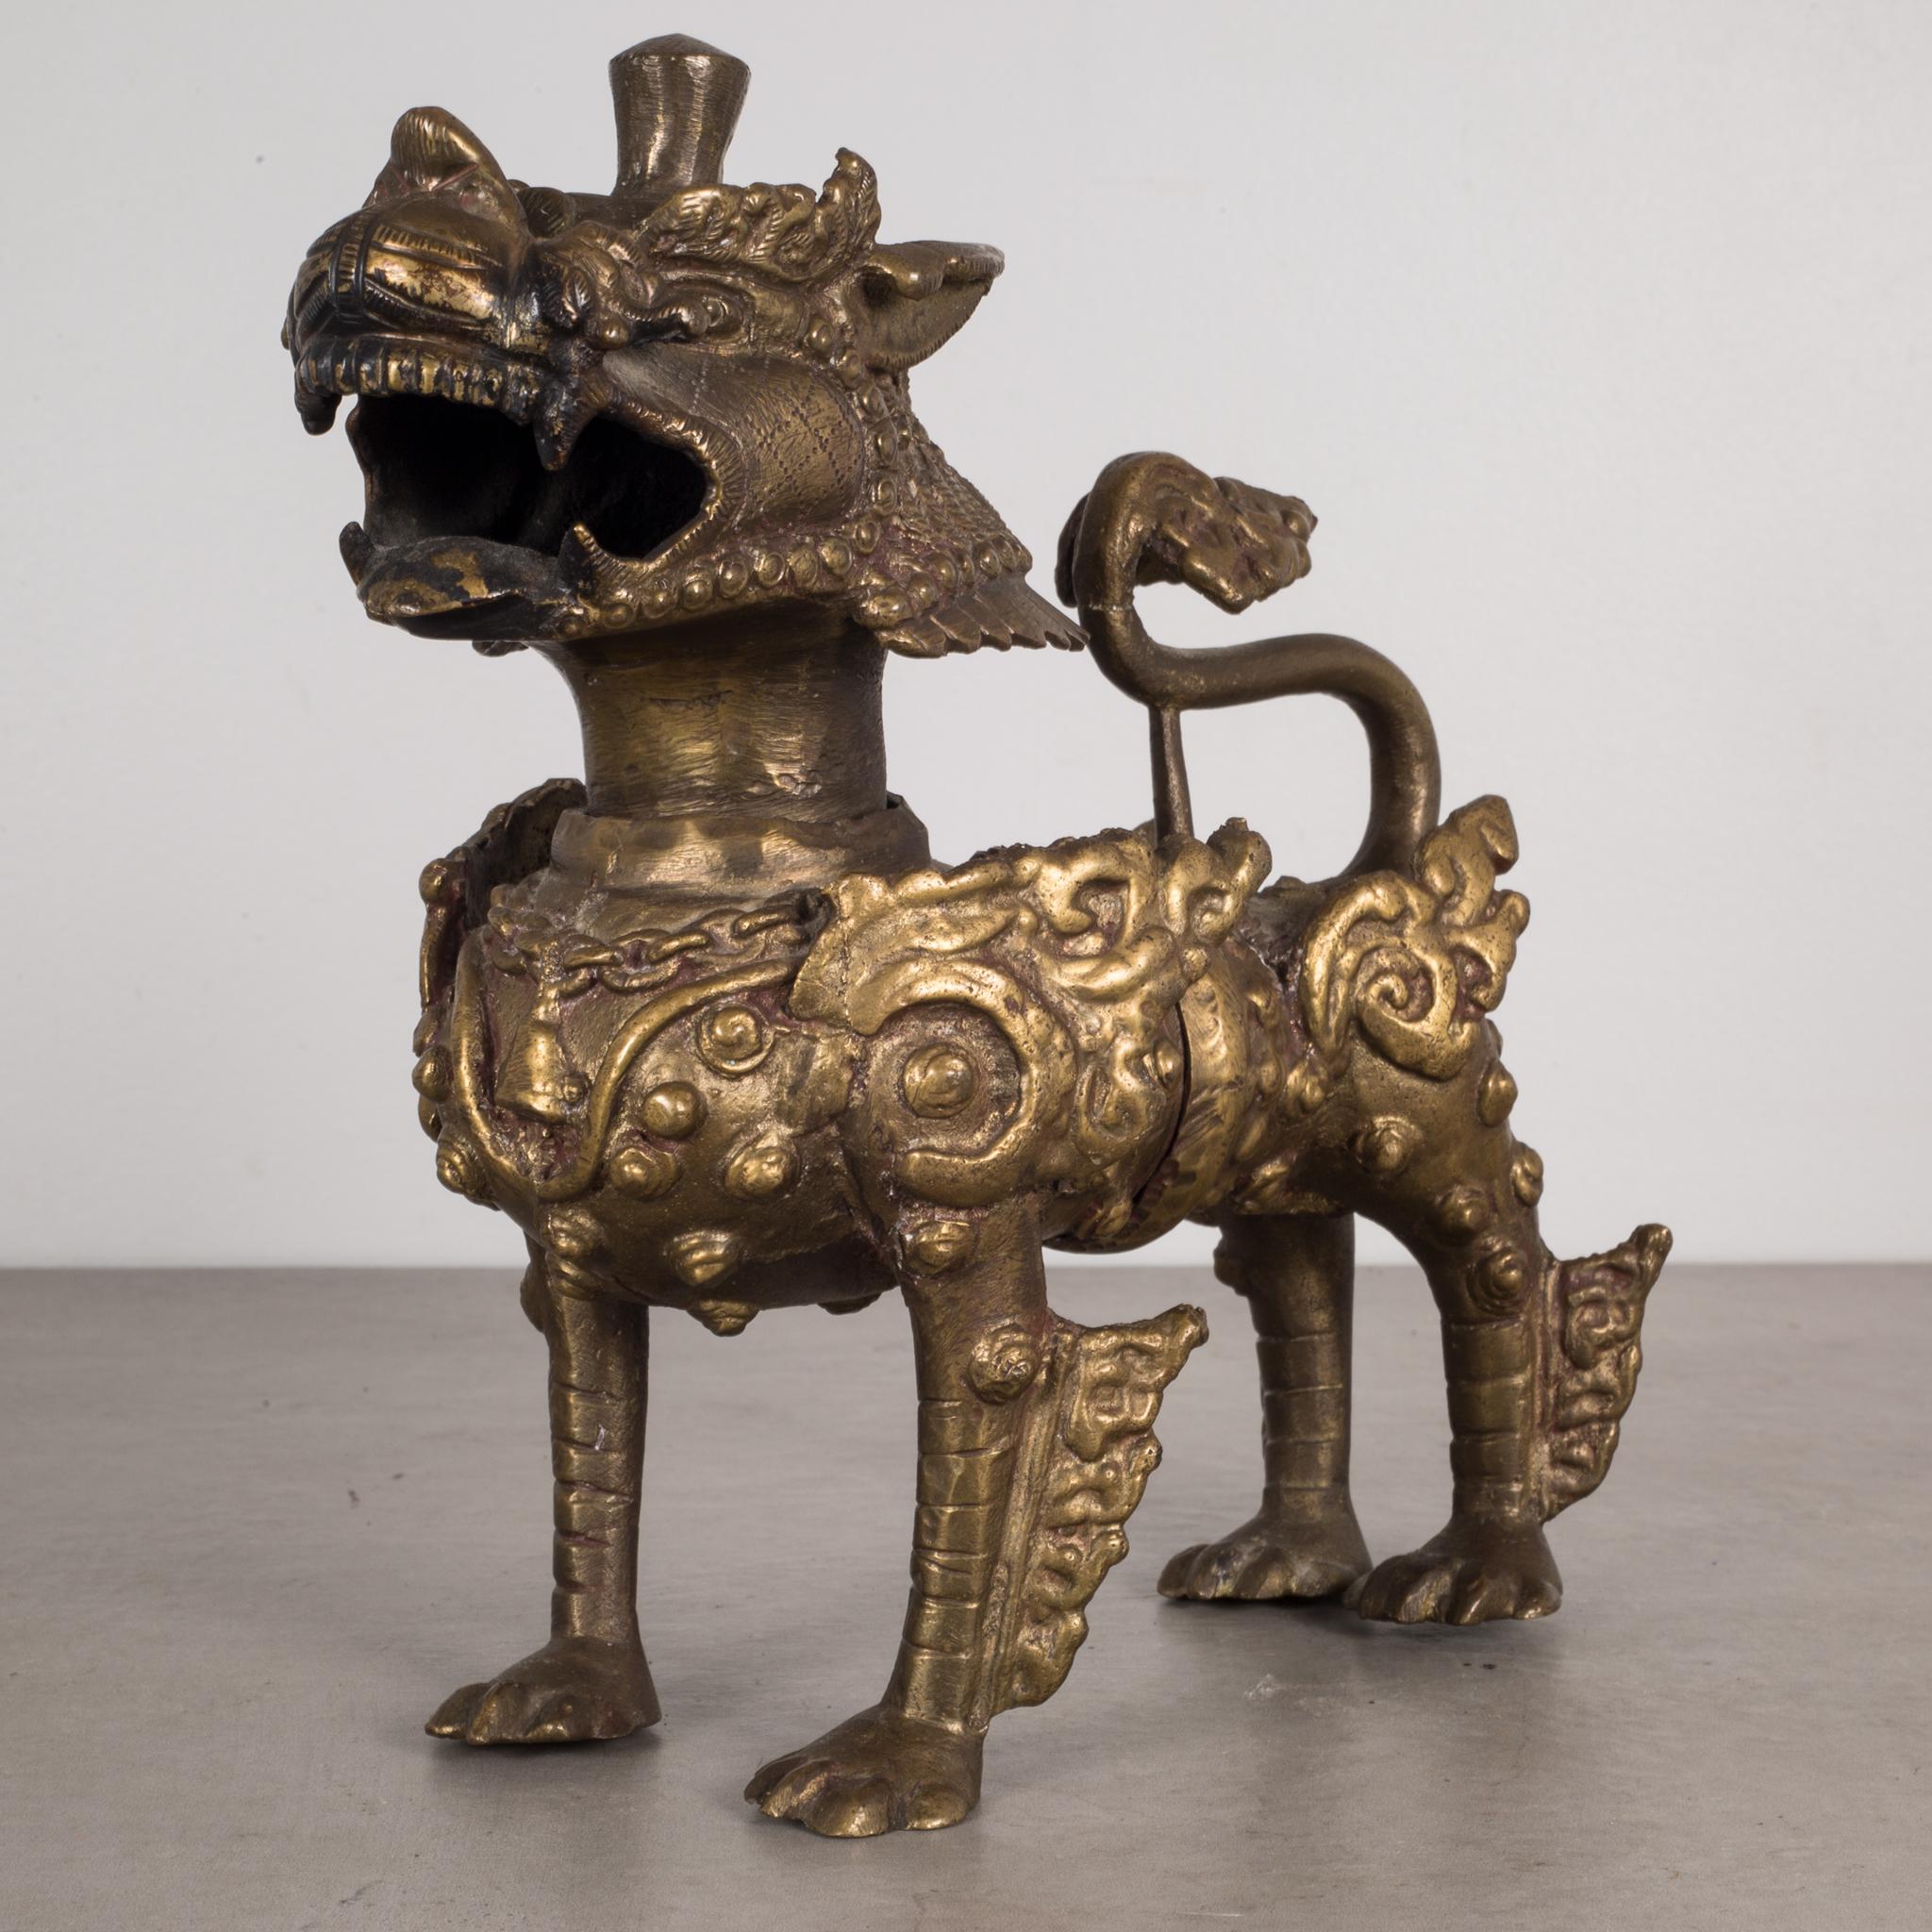 About
A pair of brass temple or Foo dogs. Most likely Cambodian.

Creator Unknown.
Date of manufacture circa 1950-1970.
Materials and techniques brass.
Condition good. Wear consistent with age and use.
Dimensions H 8 in. x W 8.5 in. x D 4.25